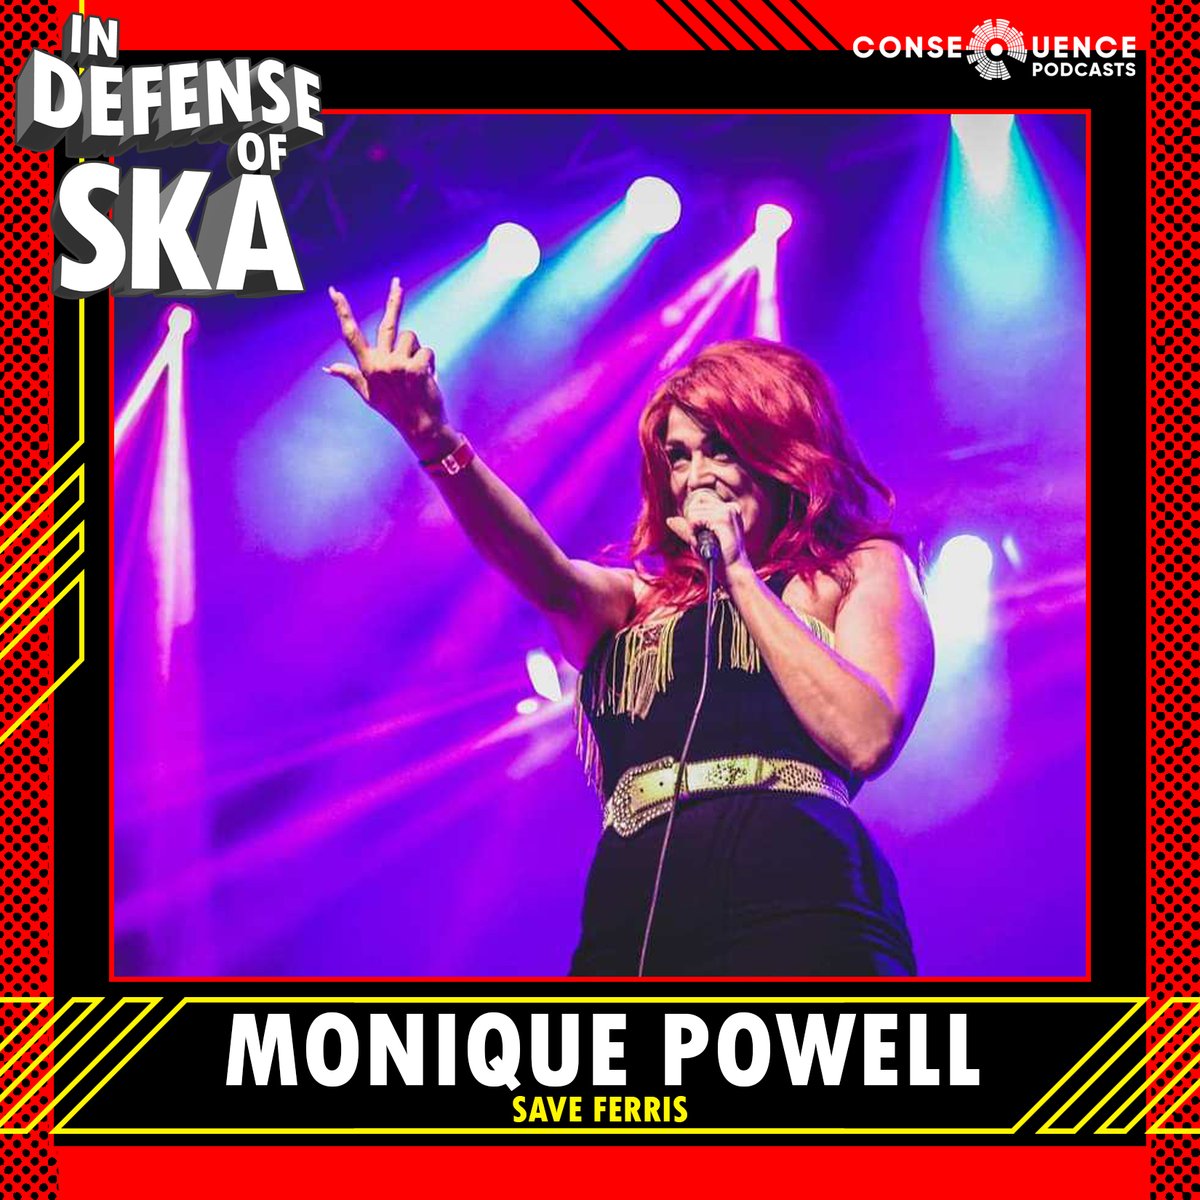 This week, @SaveFerris_1 lead singer Monique Powell joins us! We go deep into the band's history, what it was like to be part of the ska boom and fall. She also talks about the band's break up, her spine/neck surgery, reforming the band, the SF Vegas show, the BotH fire and more!